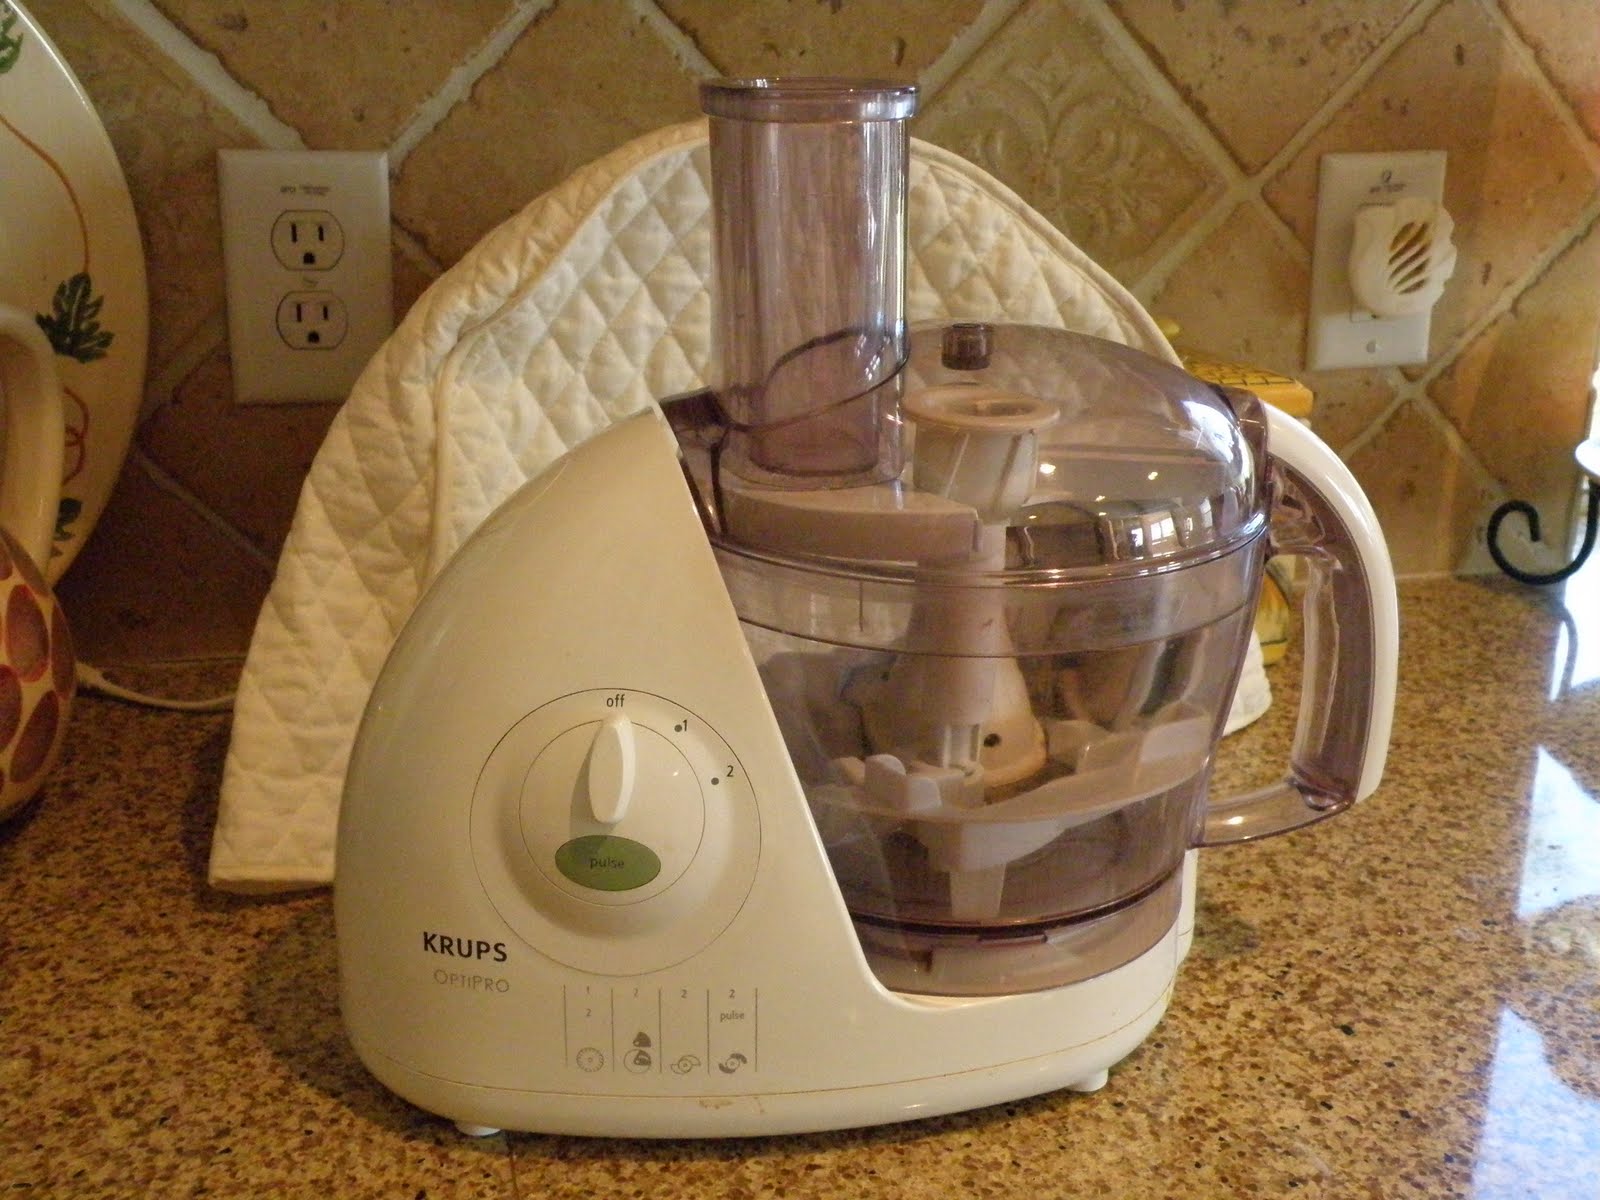 Can you use a blender to puree food instead of a food processor?